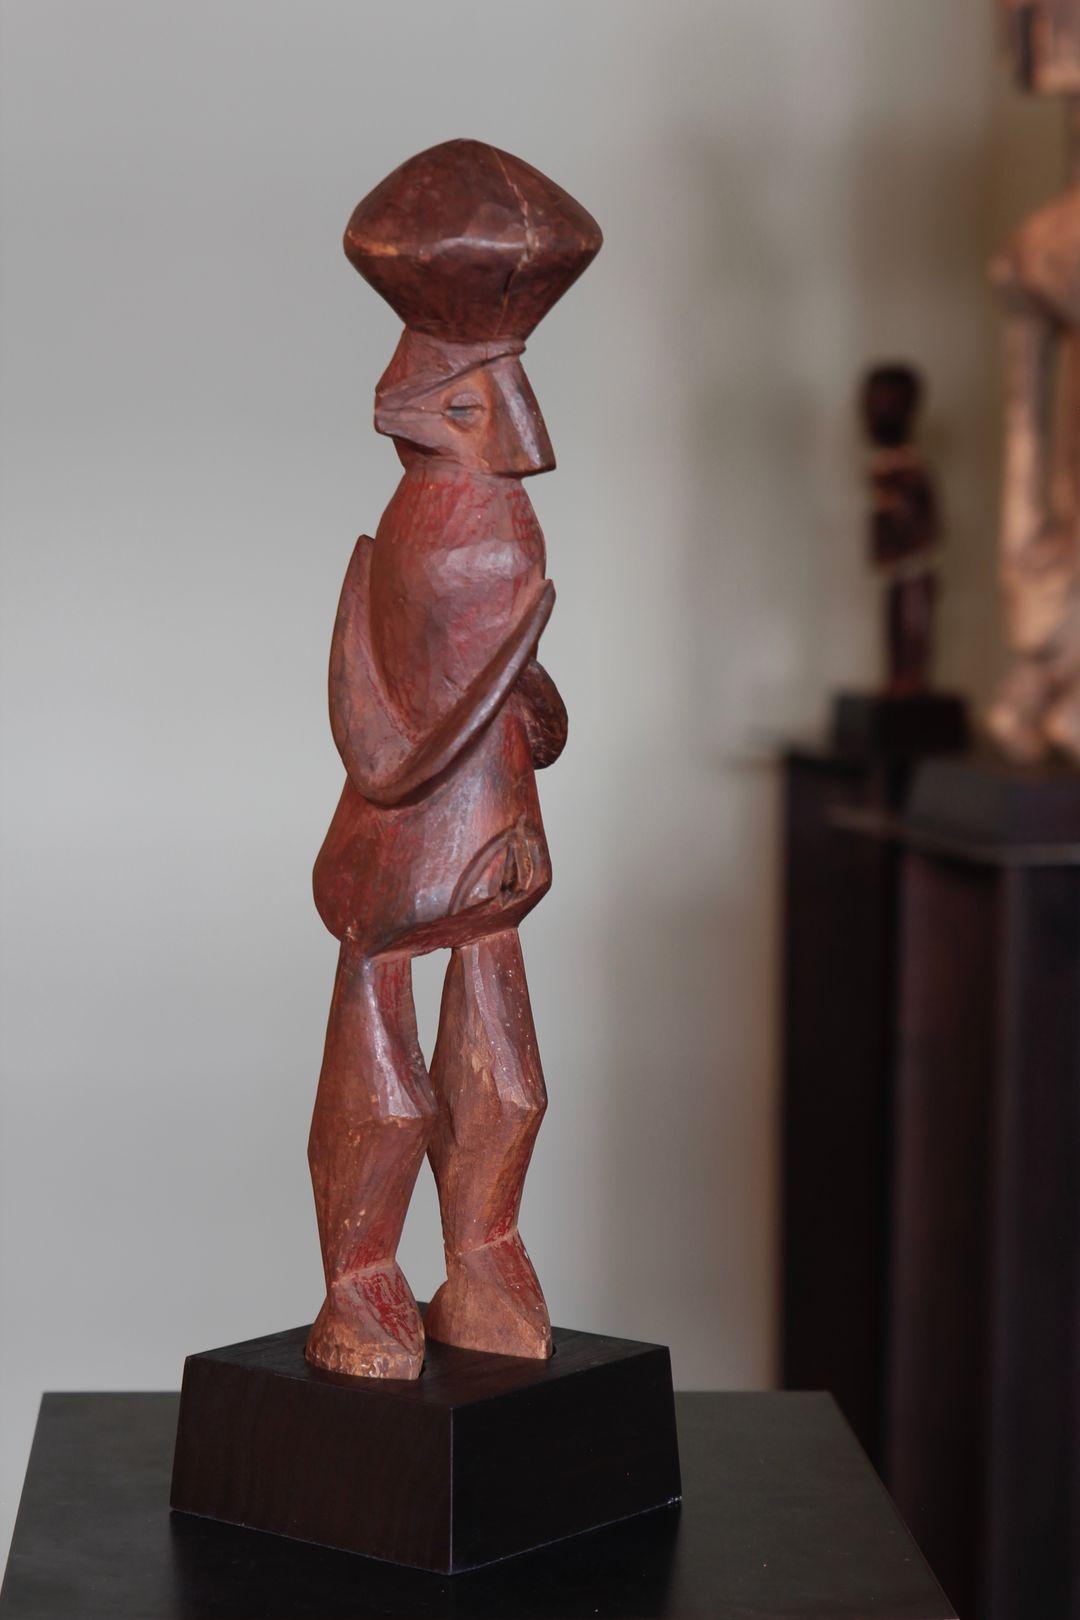 This beautifully carved 'Biteki' figure, from the Yaka culture in the Democratic Republic of the Congo, depicts a female crowned with a large, abstracted coiffure. The figure exhibits a wonderful sculptural form with Cubist-like legs, and a sense of